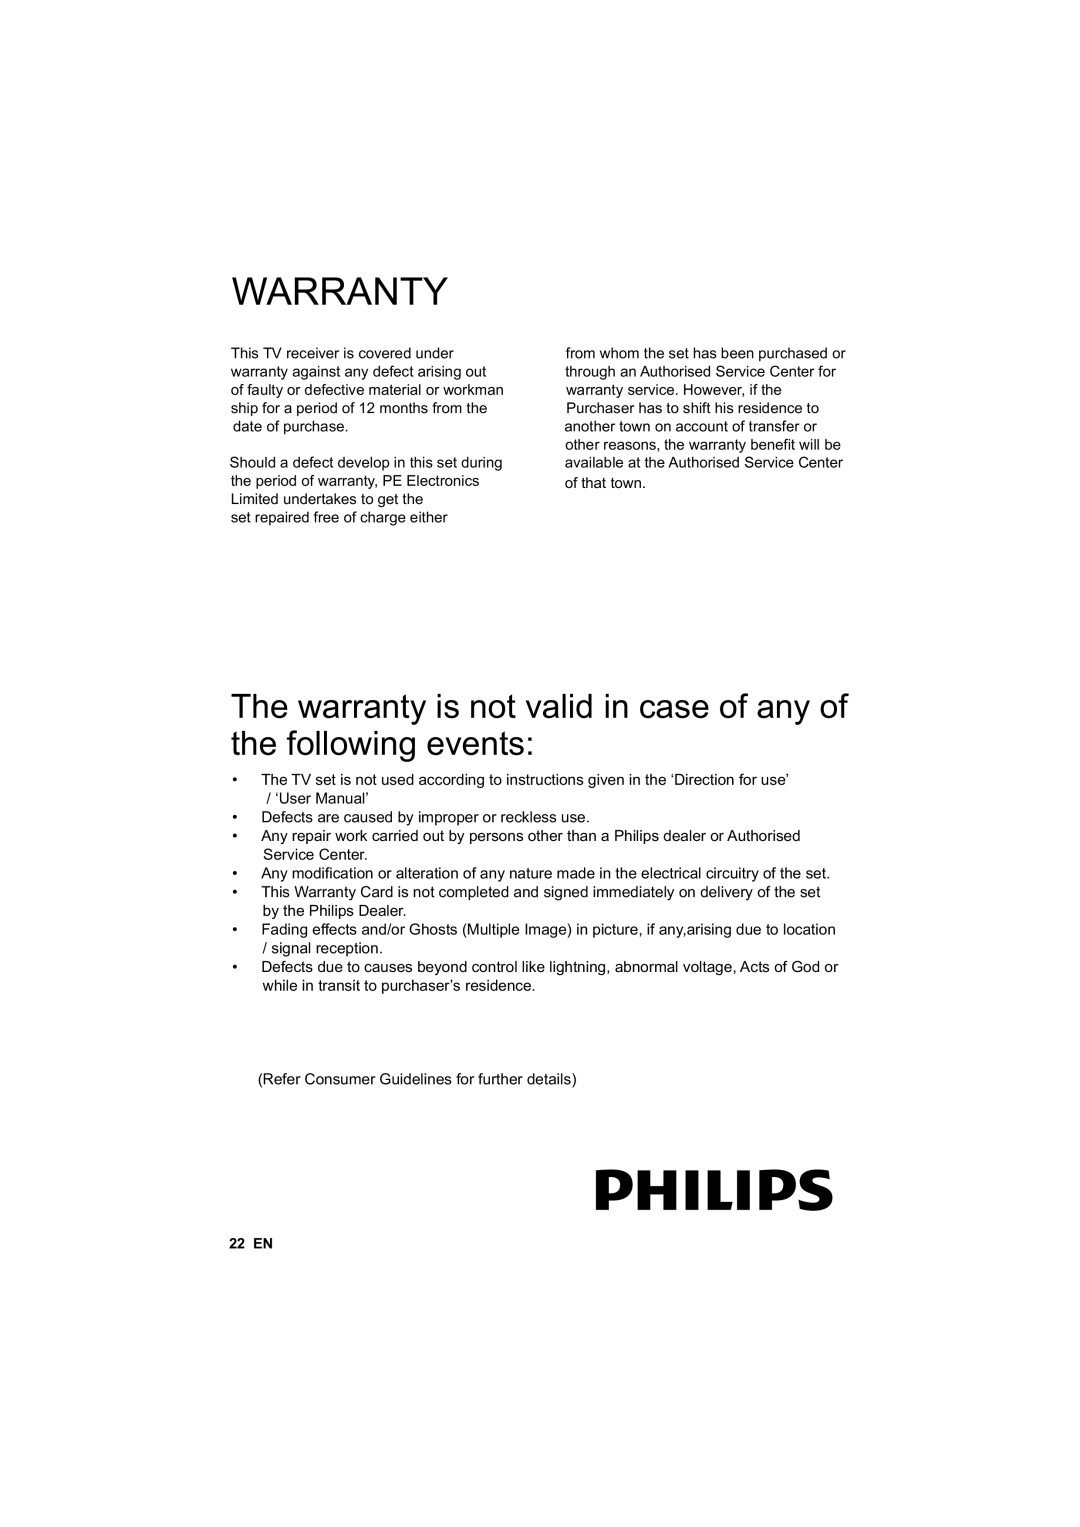 Philips 29PFL4738/V7, 50PFL4758/V7 Warranty, The warranty is not valid in case of any of the following events, 22 EN 